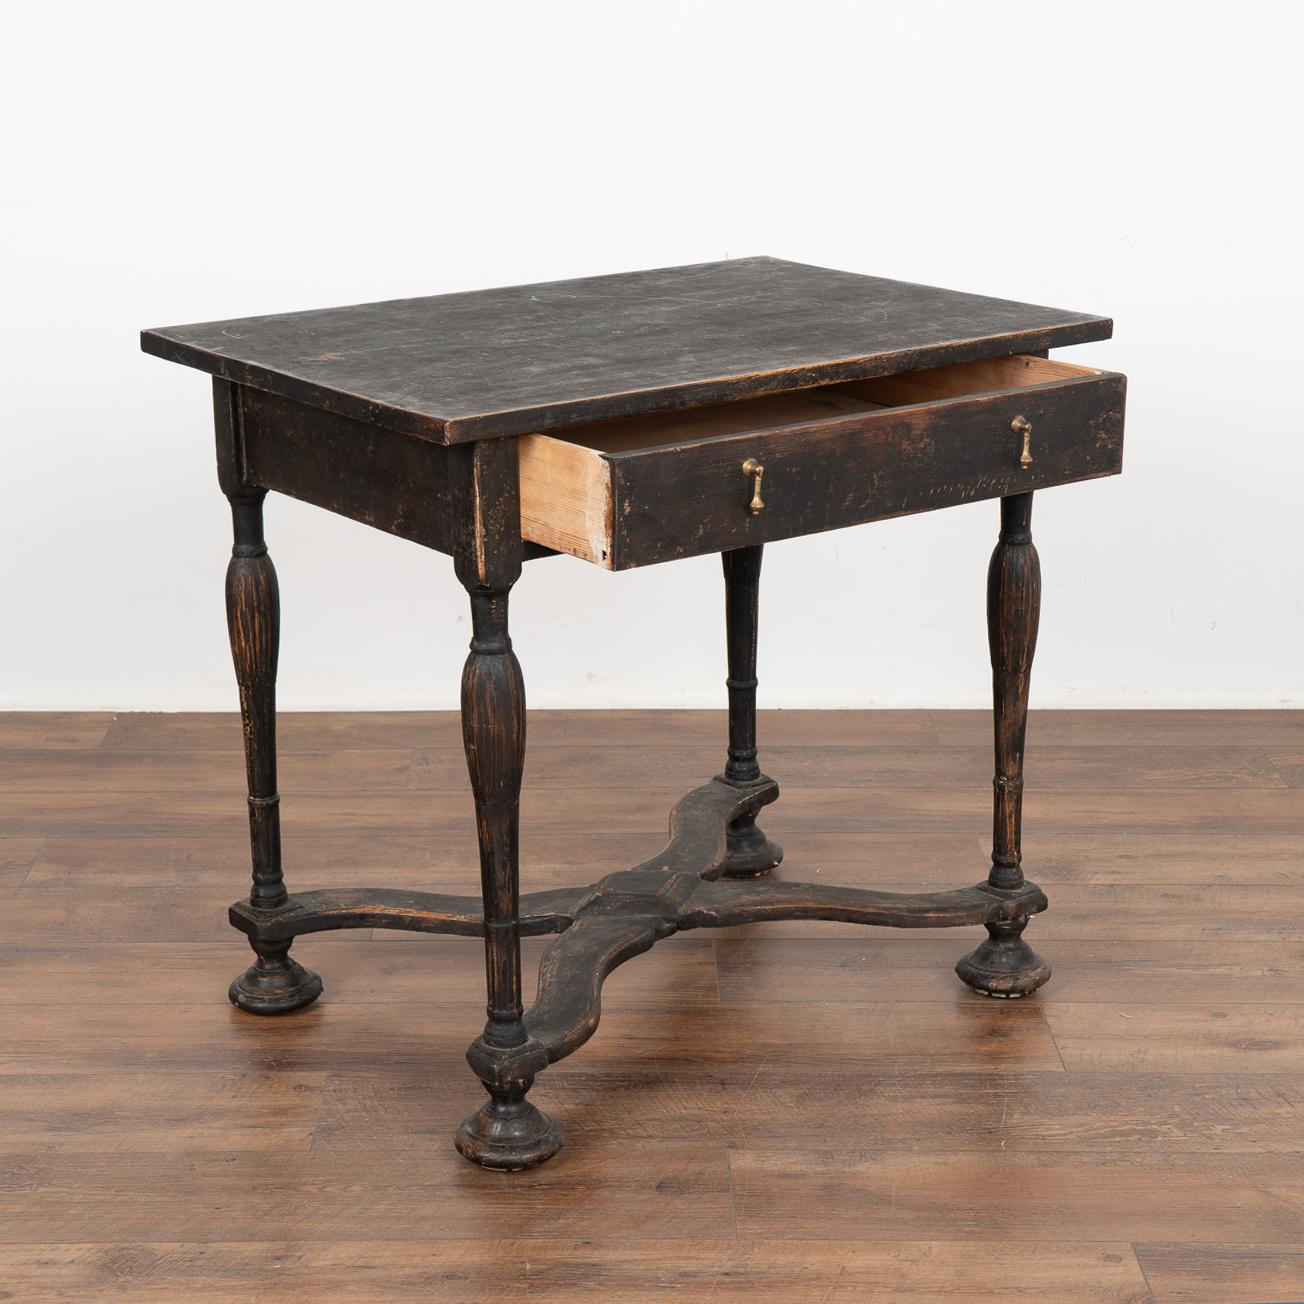 Country Black Side Table With Single Drawer, Sweden circa 1820